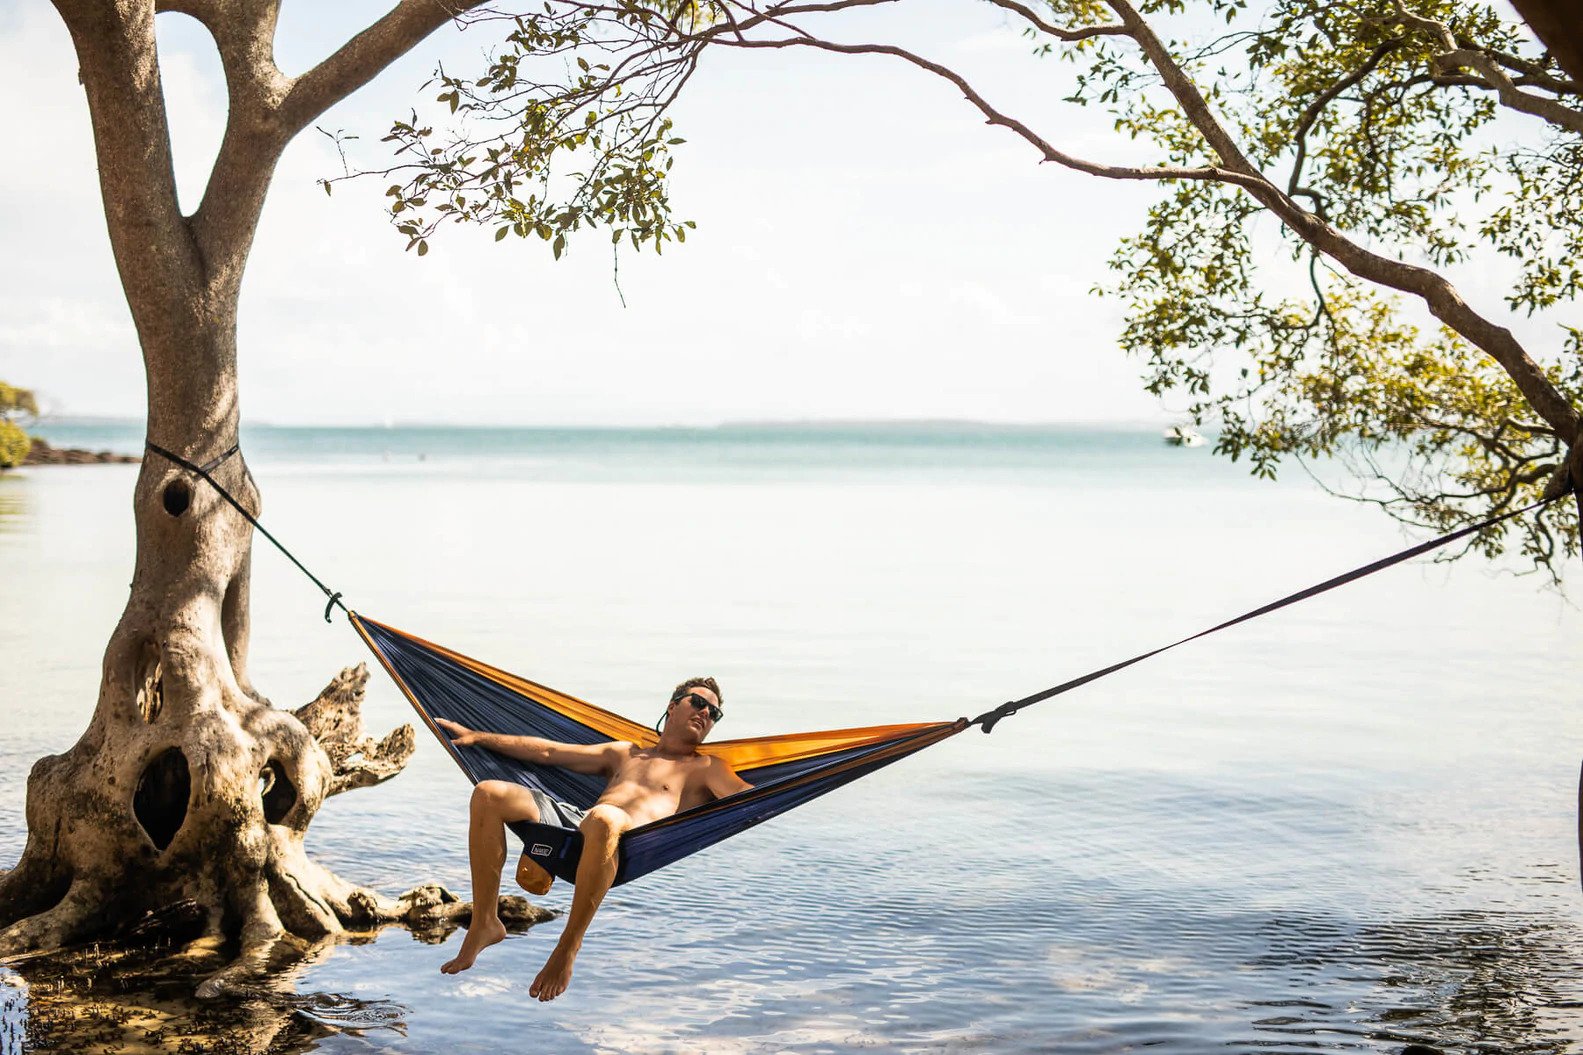 What Type of Hammock Should I Buy?